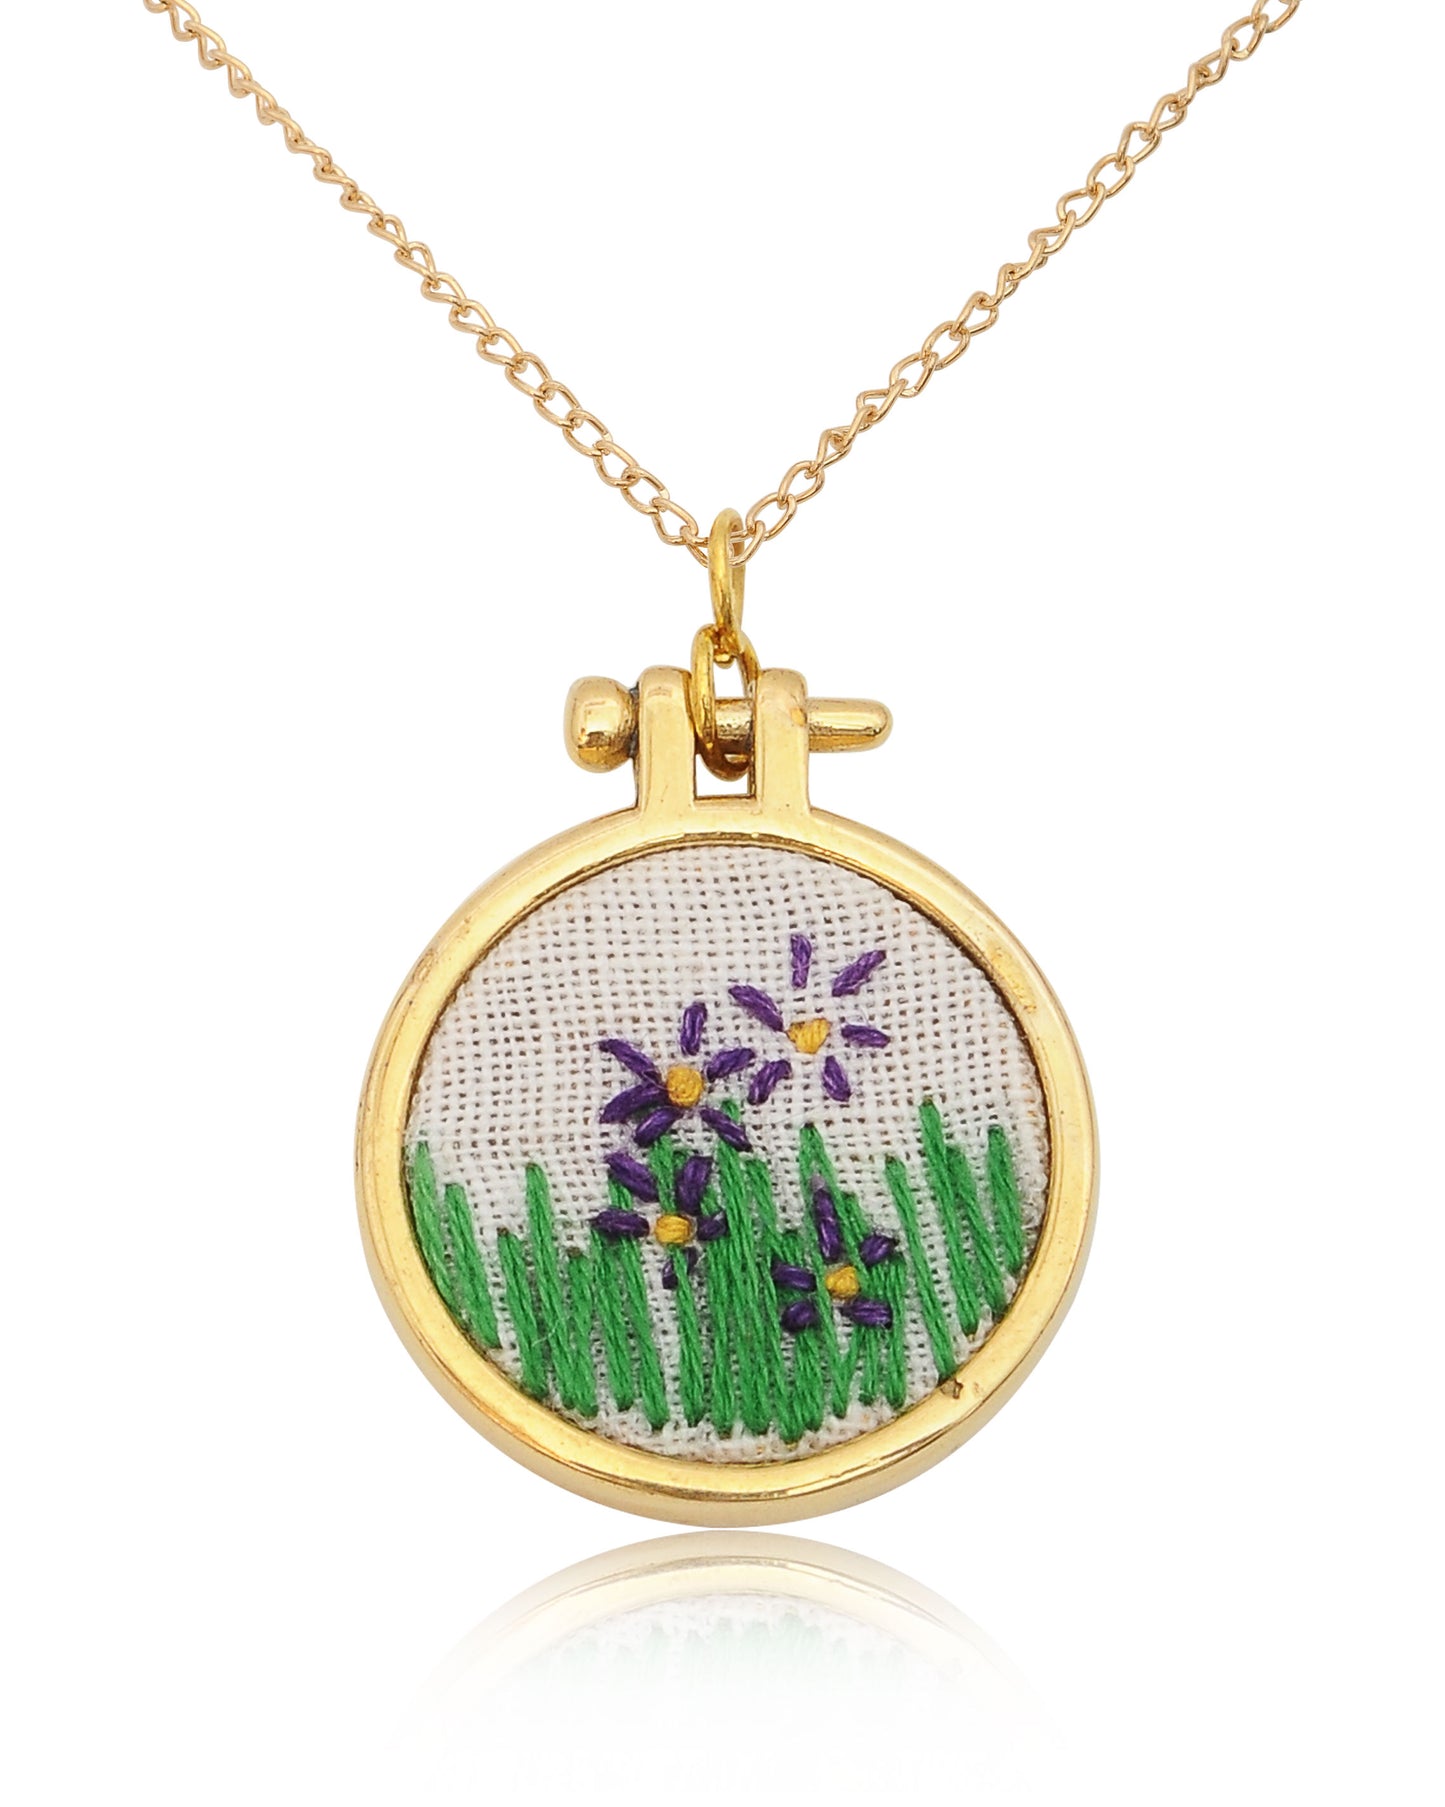 Embroidered Necklace Hand Stitched Statement Jewelry Floral Animal Fruit Pendant